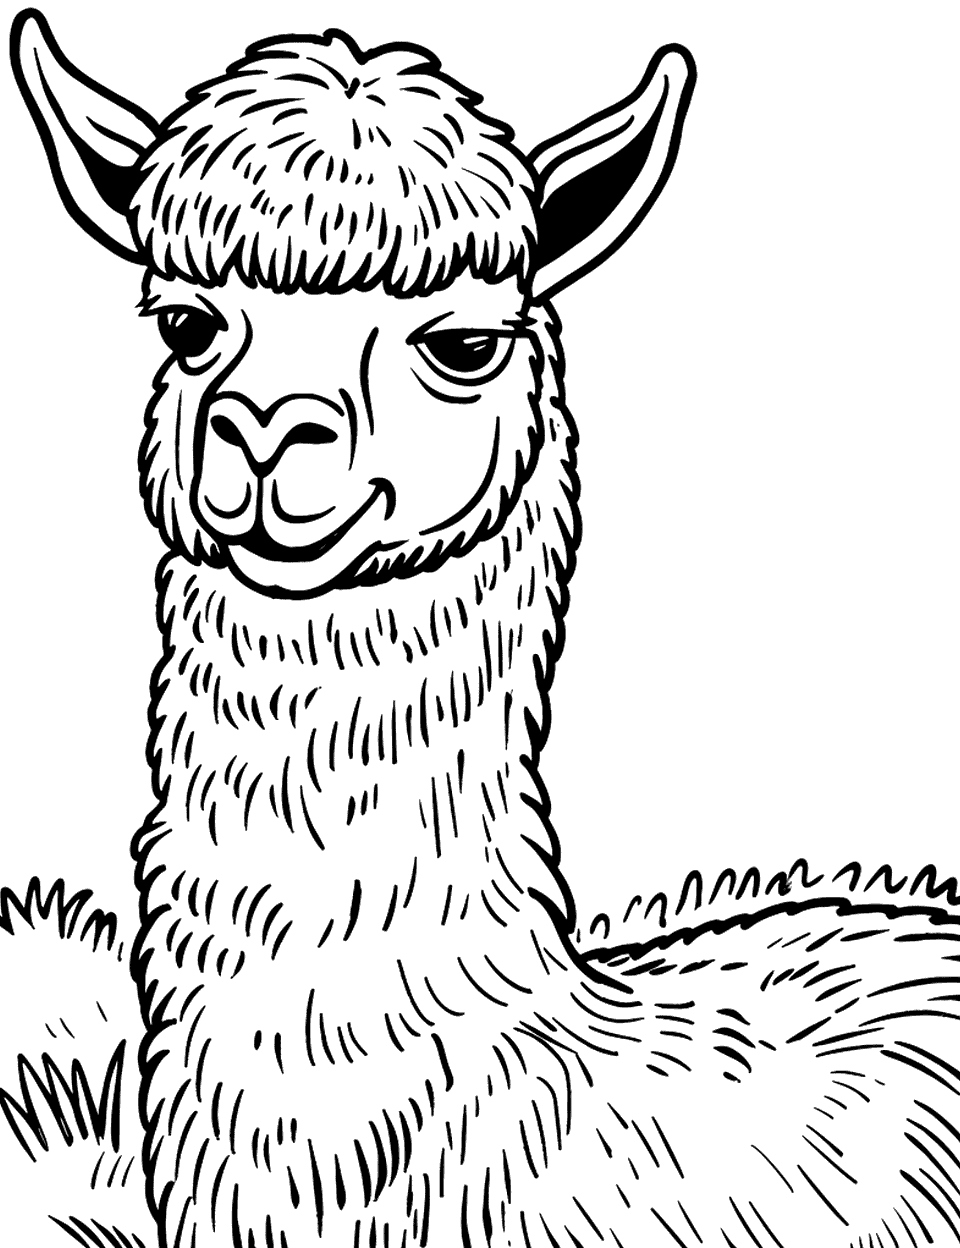 Alpaca with a Funny Haircut Farm Animal Coloring Page - An alpaca with a humorous haircut, looking slightly bemused.